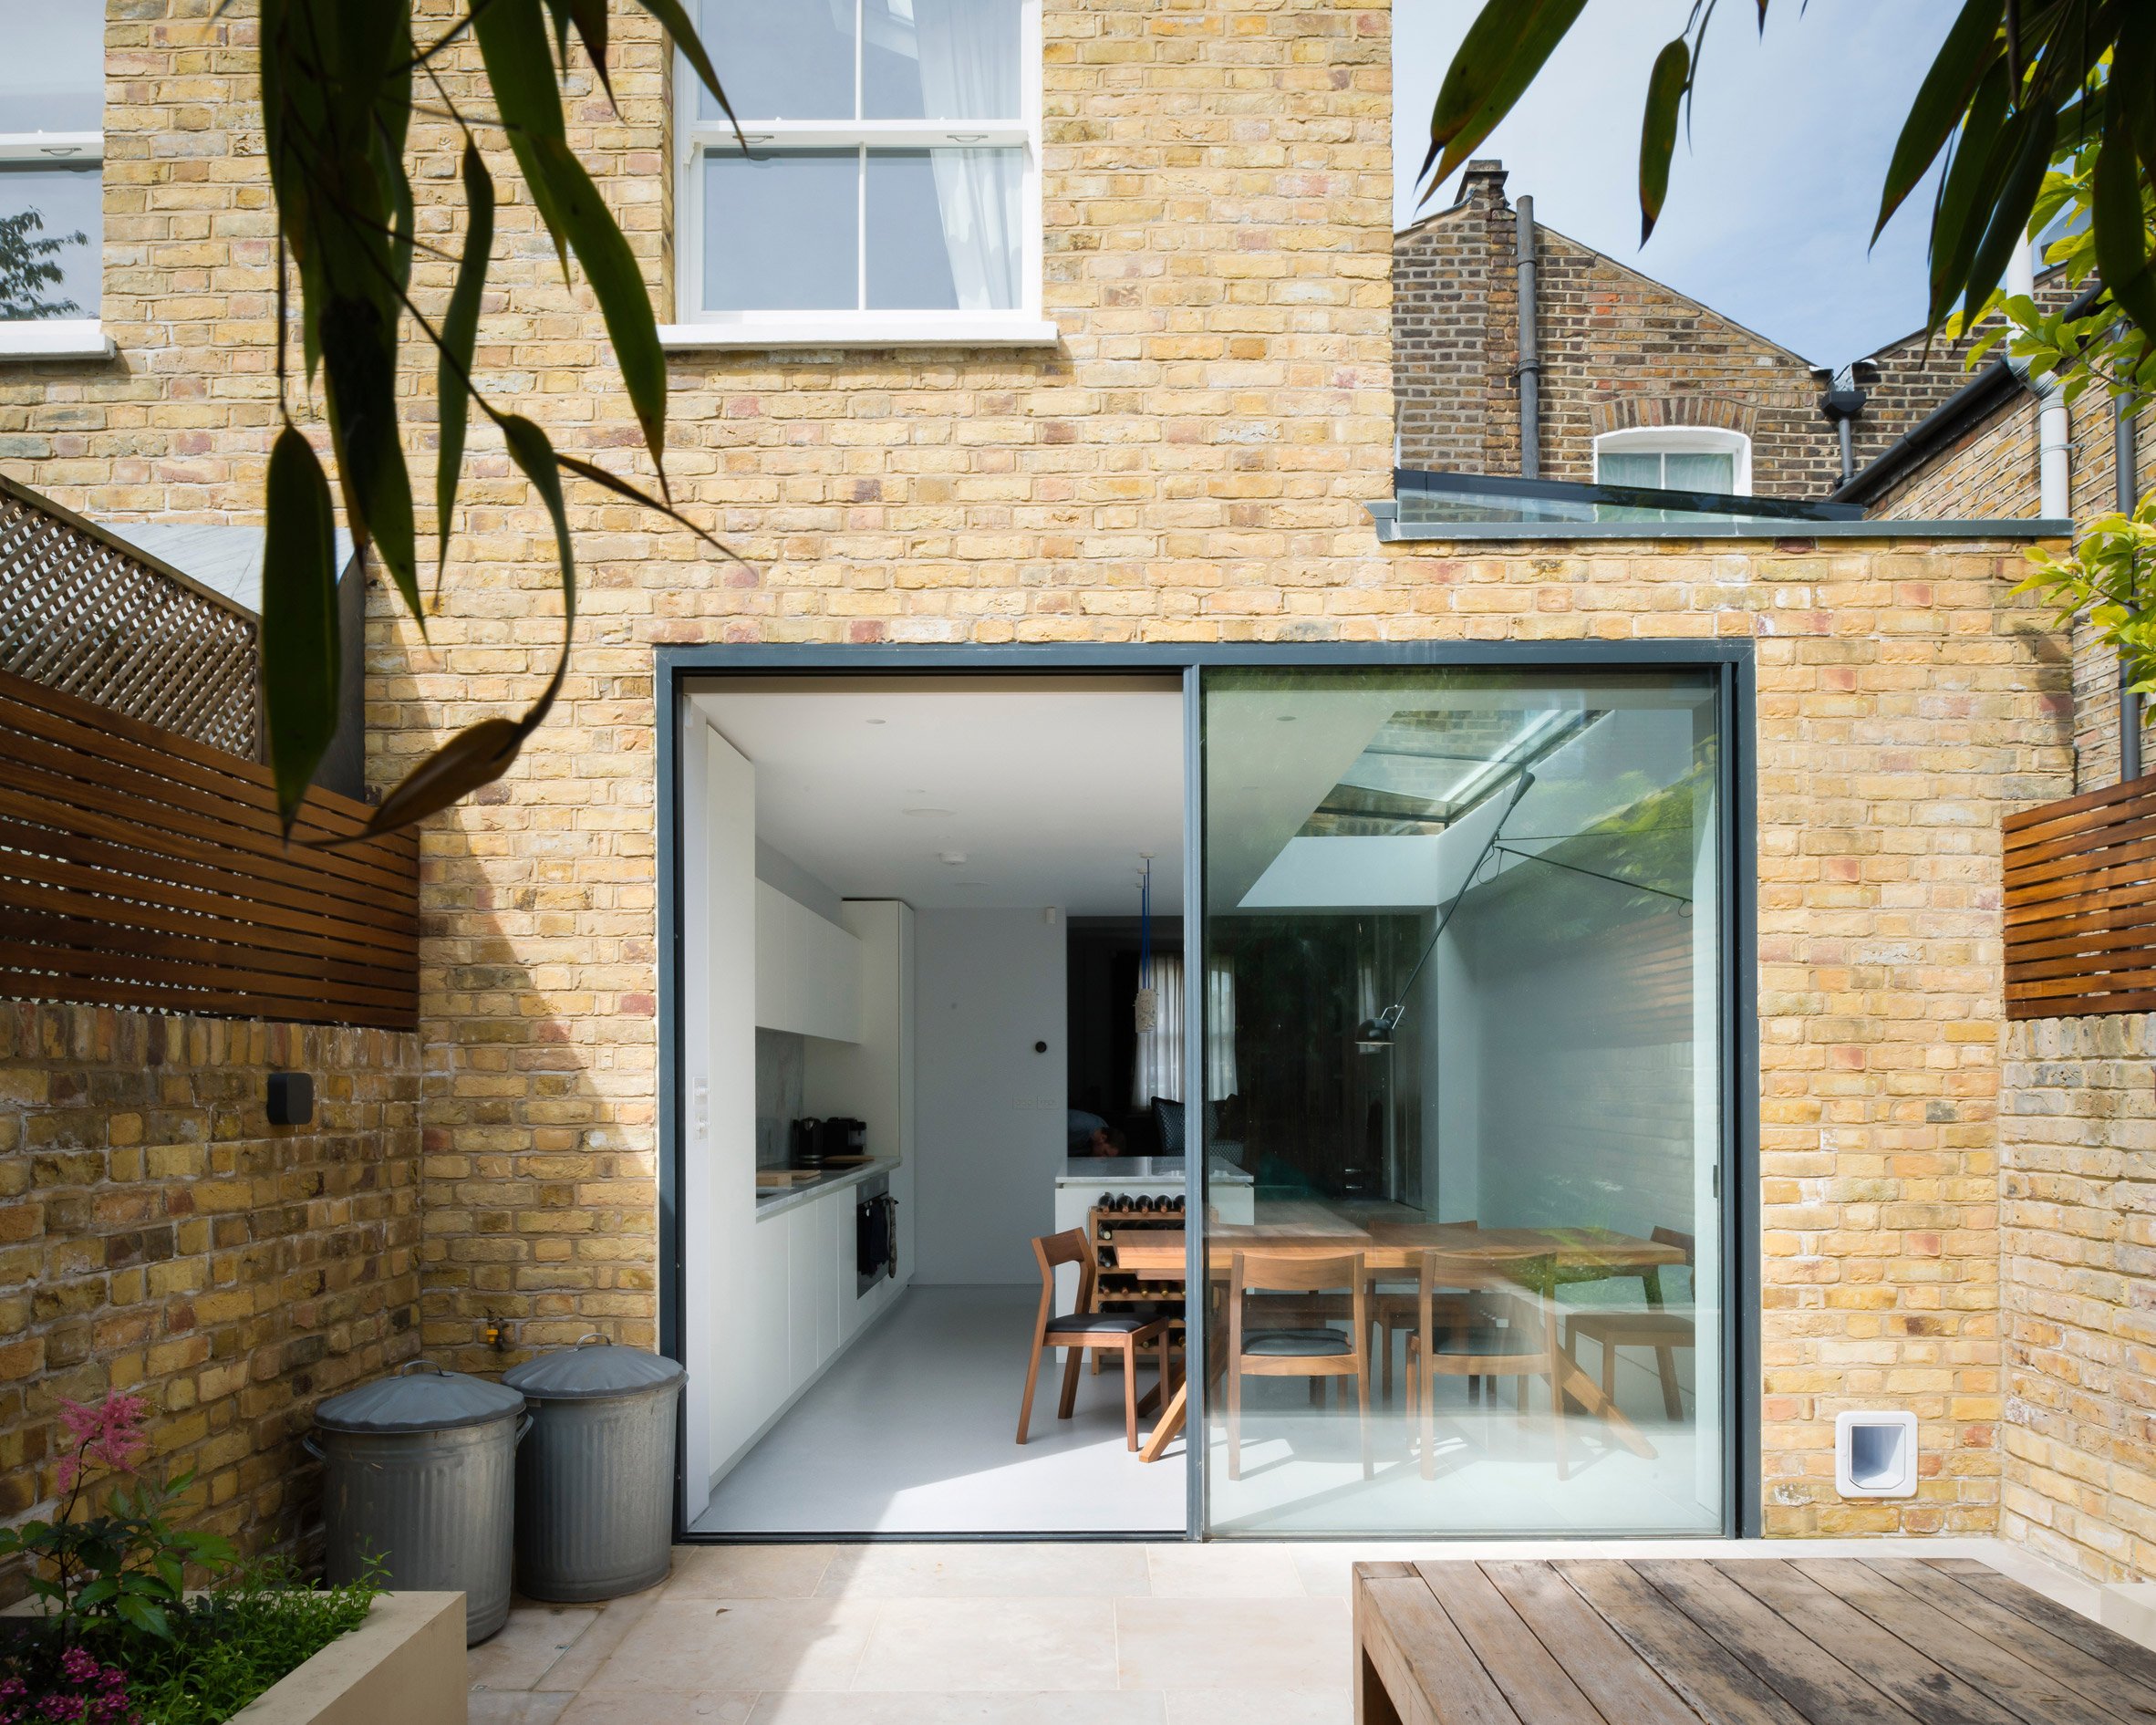 Tandom house extensions by Architecture For London